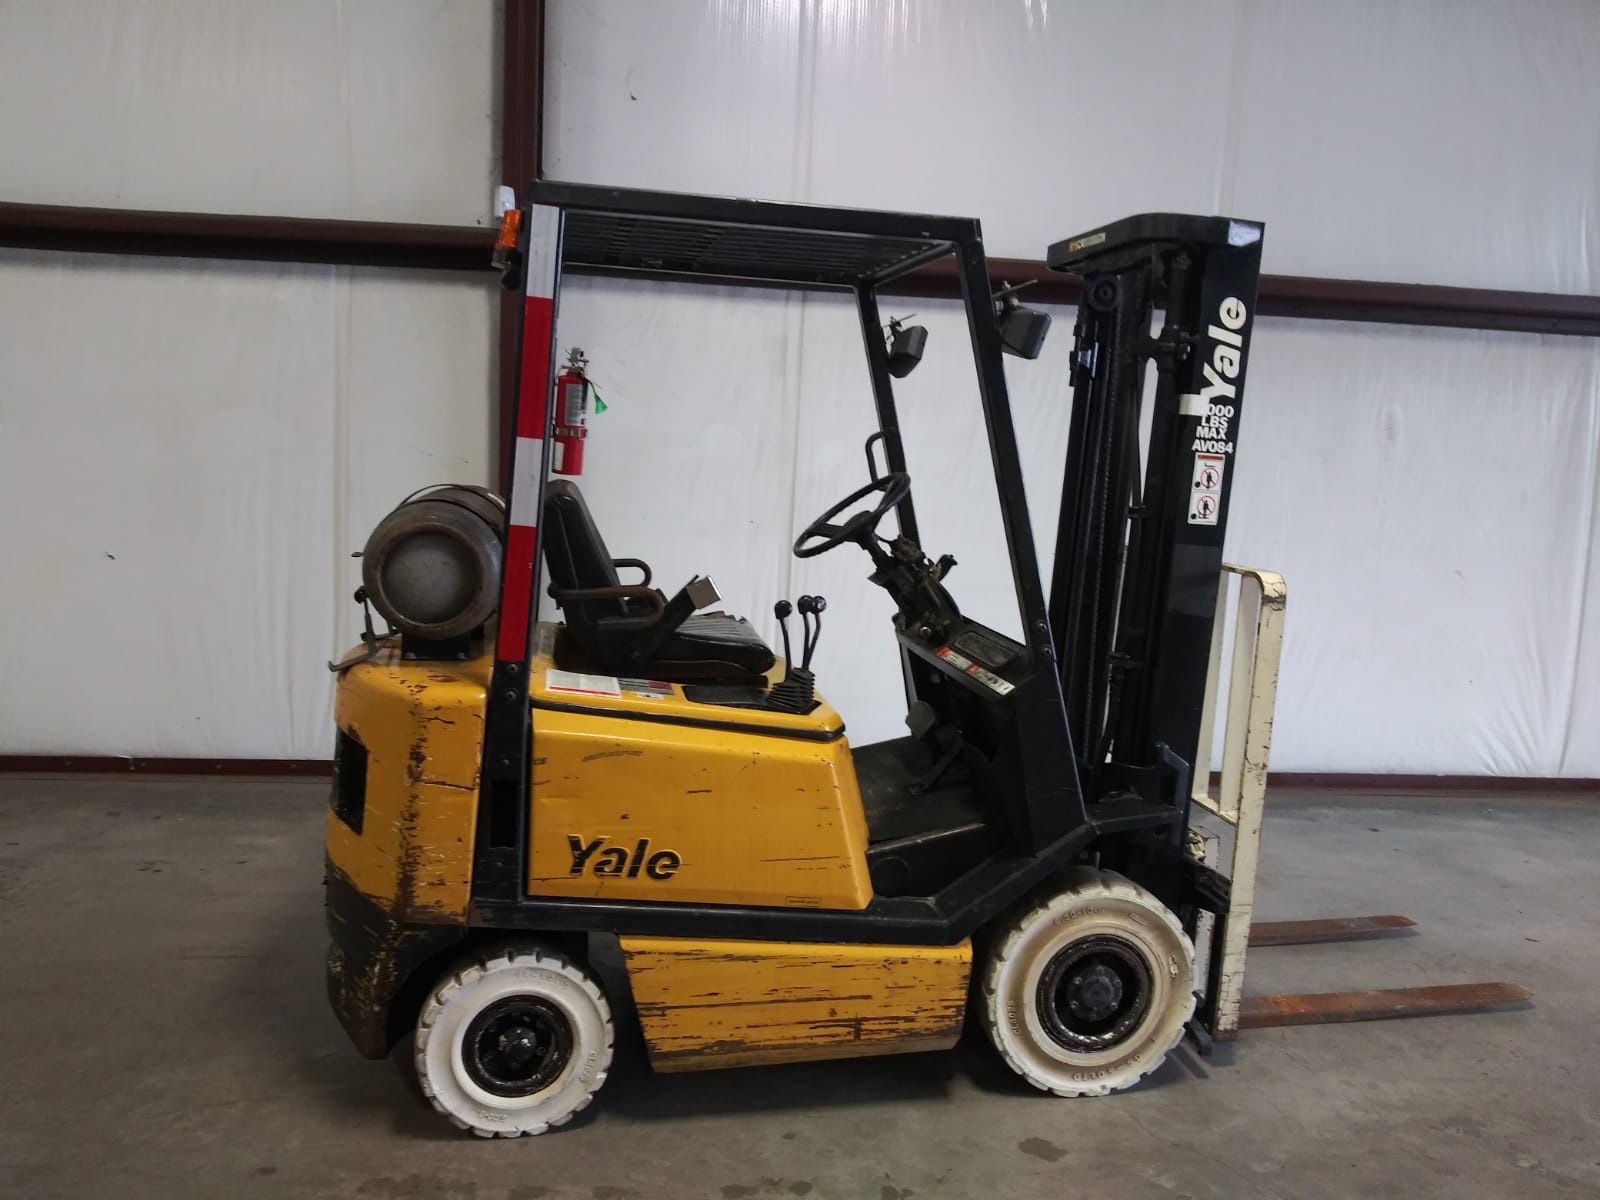 Yale 3000 lbs capacity forklift